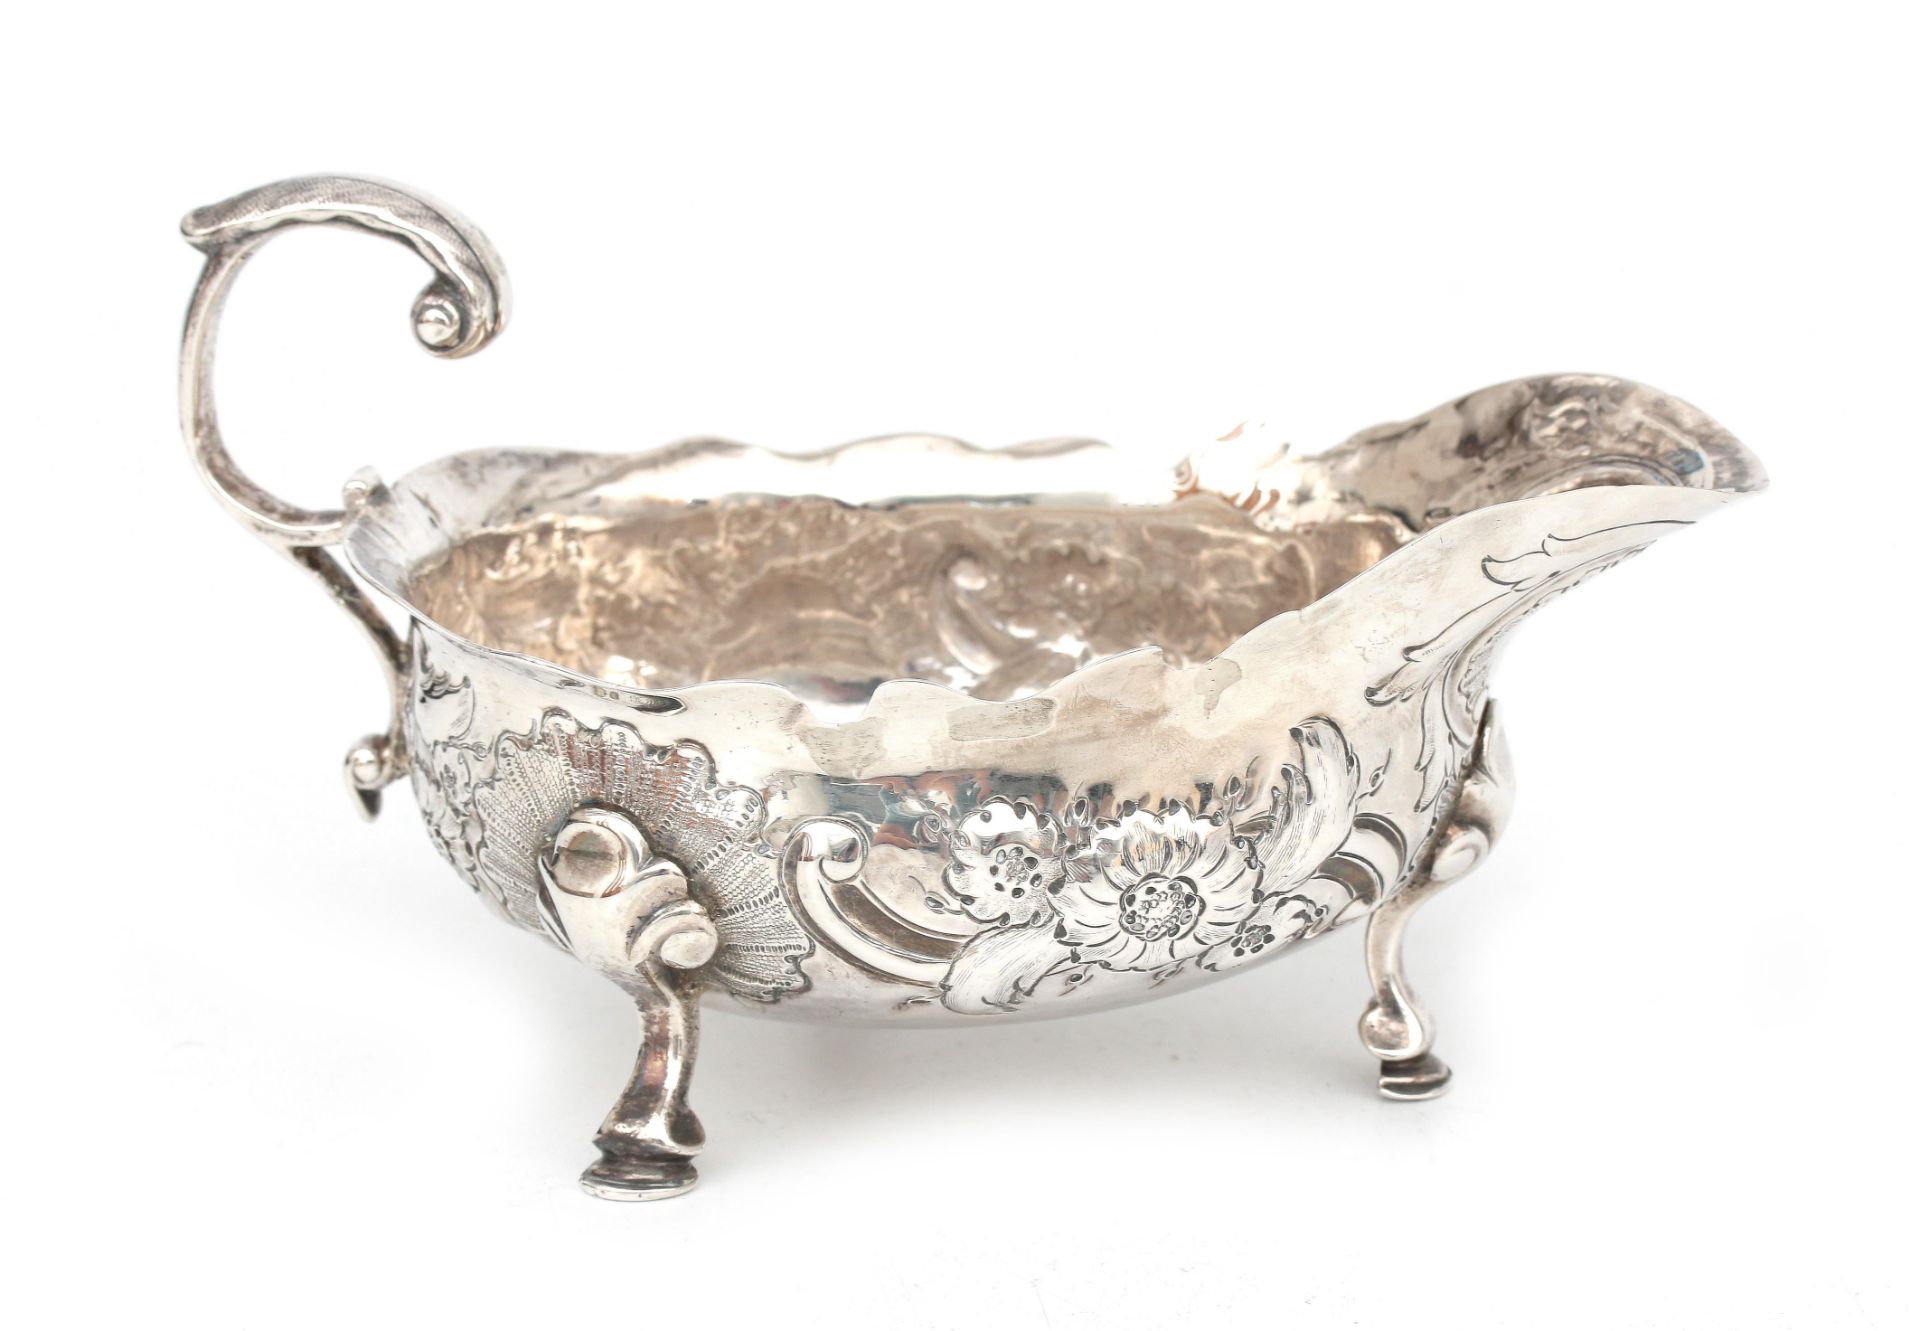 An 925 silver gravy boat on three feet with embossed- and engraved floral decoration, Robert Brown, - Image 2 of 4